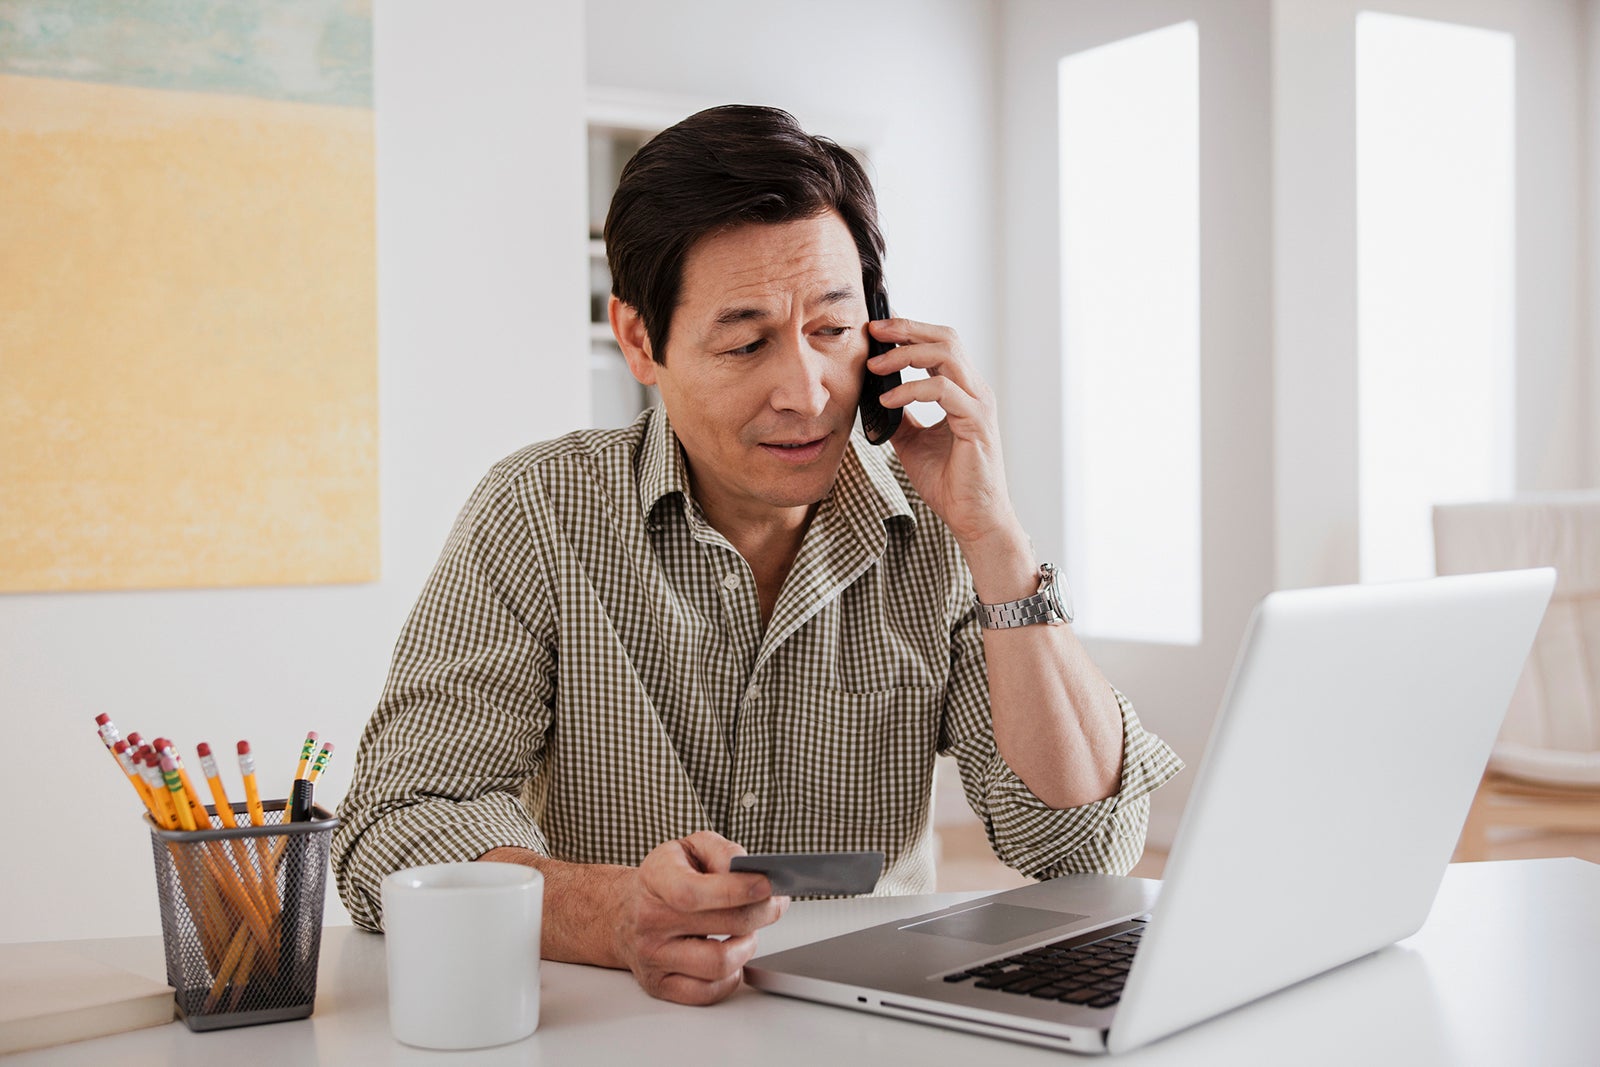 A man holding a credit card while on the phone in front of a laptop